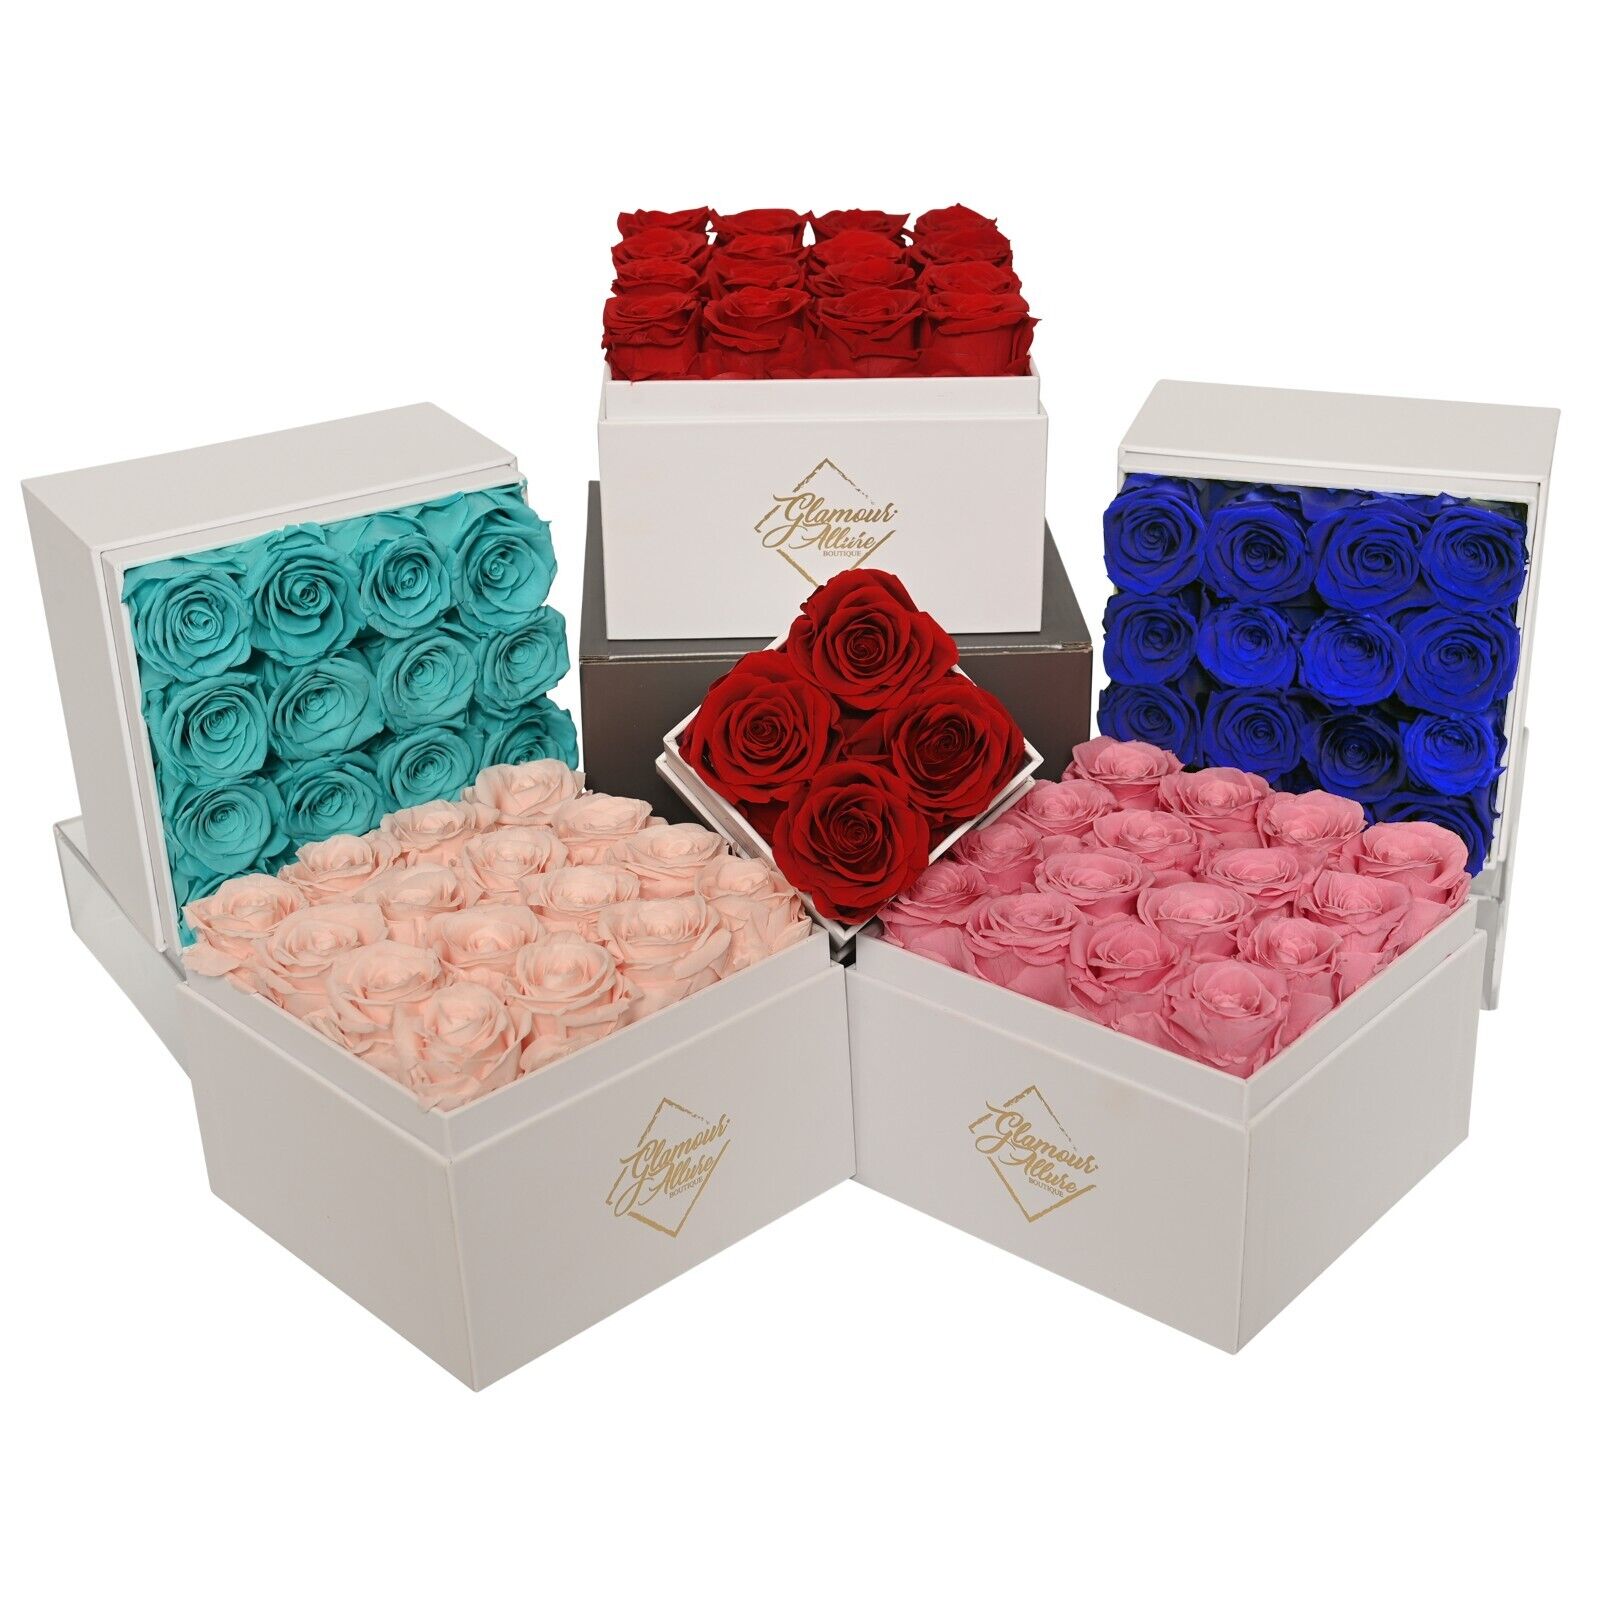 Handmade Preserved Real Roses in a Gift Box - 16 roses - Preserved Flowers Glamour Allure Boutoque